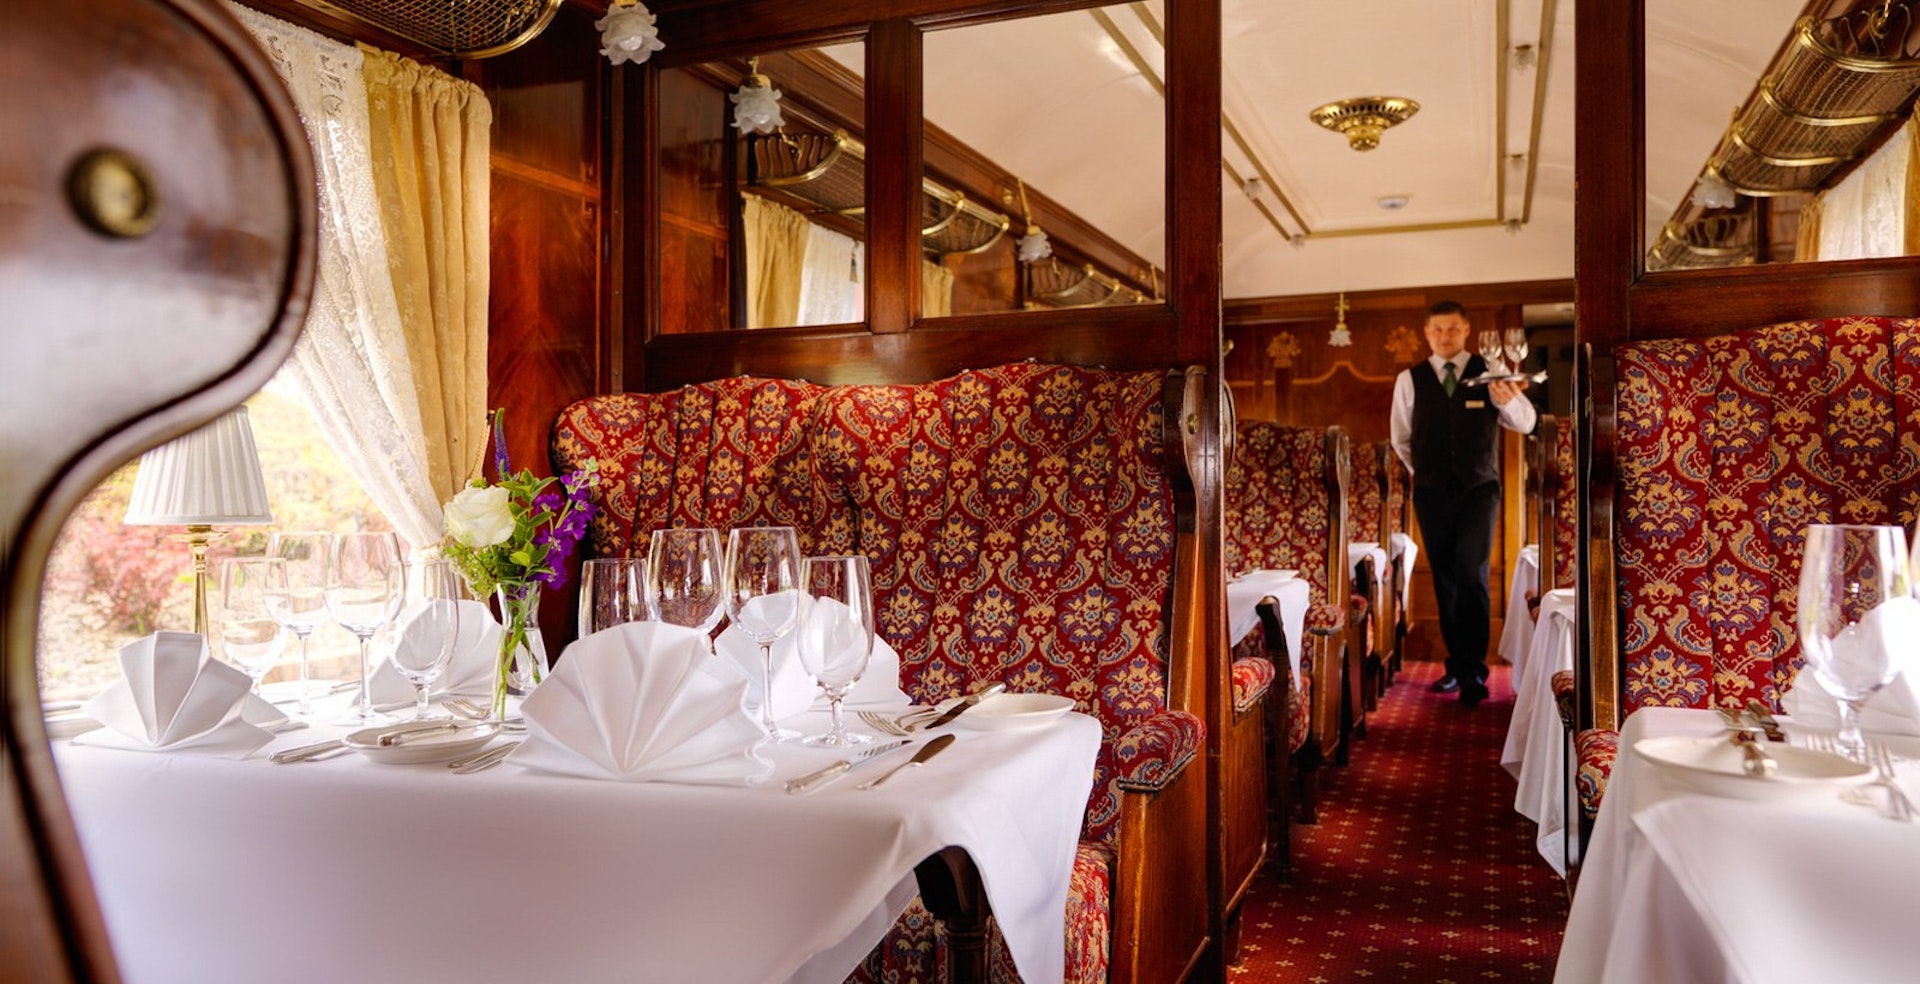 No murders but killer food on the Orient Express © Glenlo Abbey